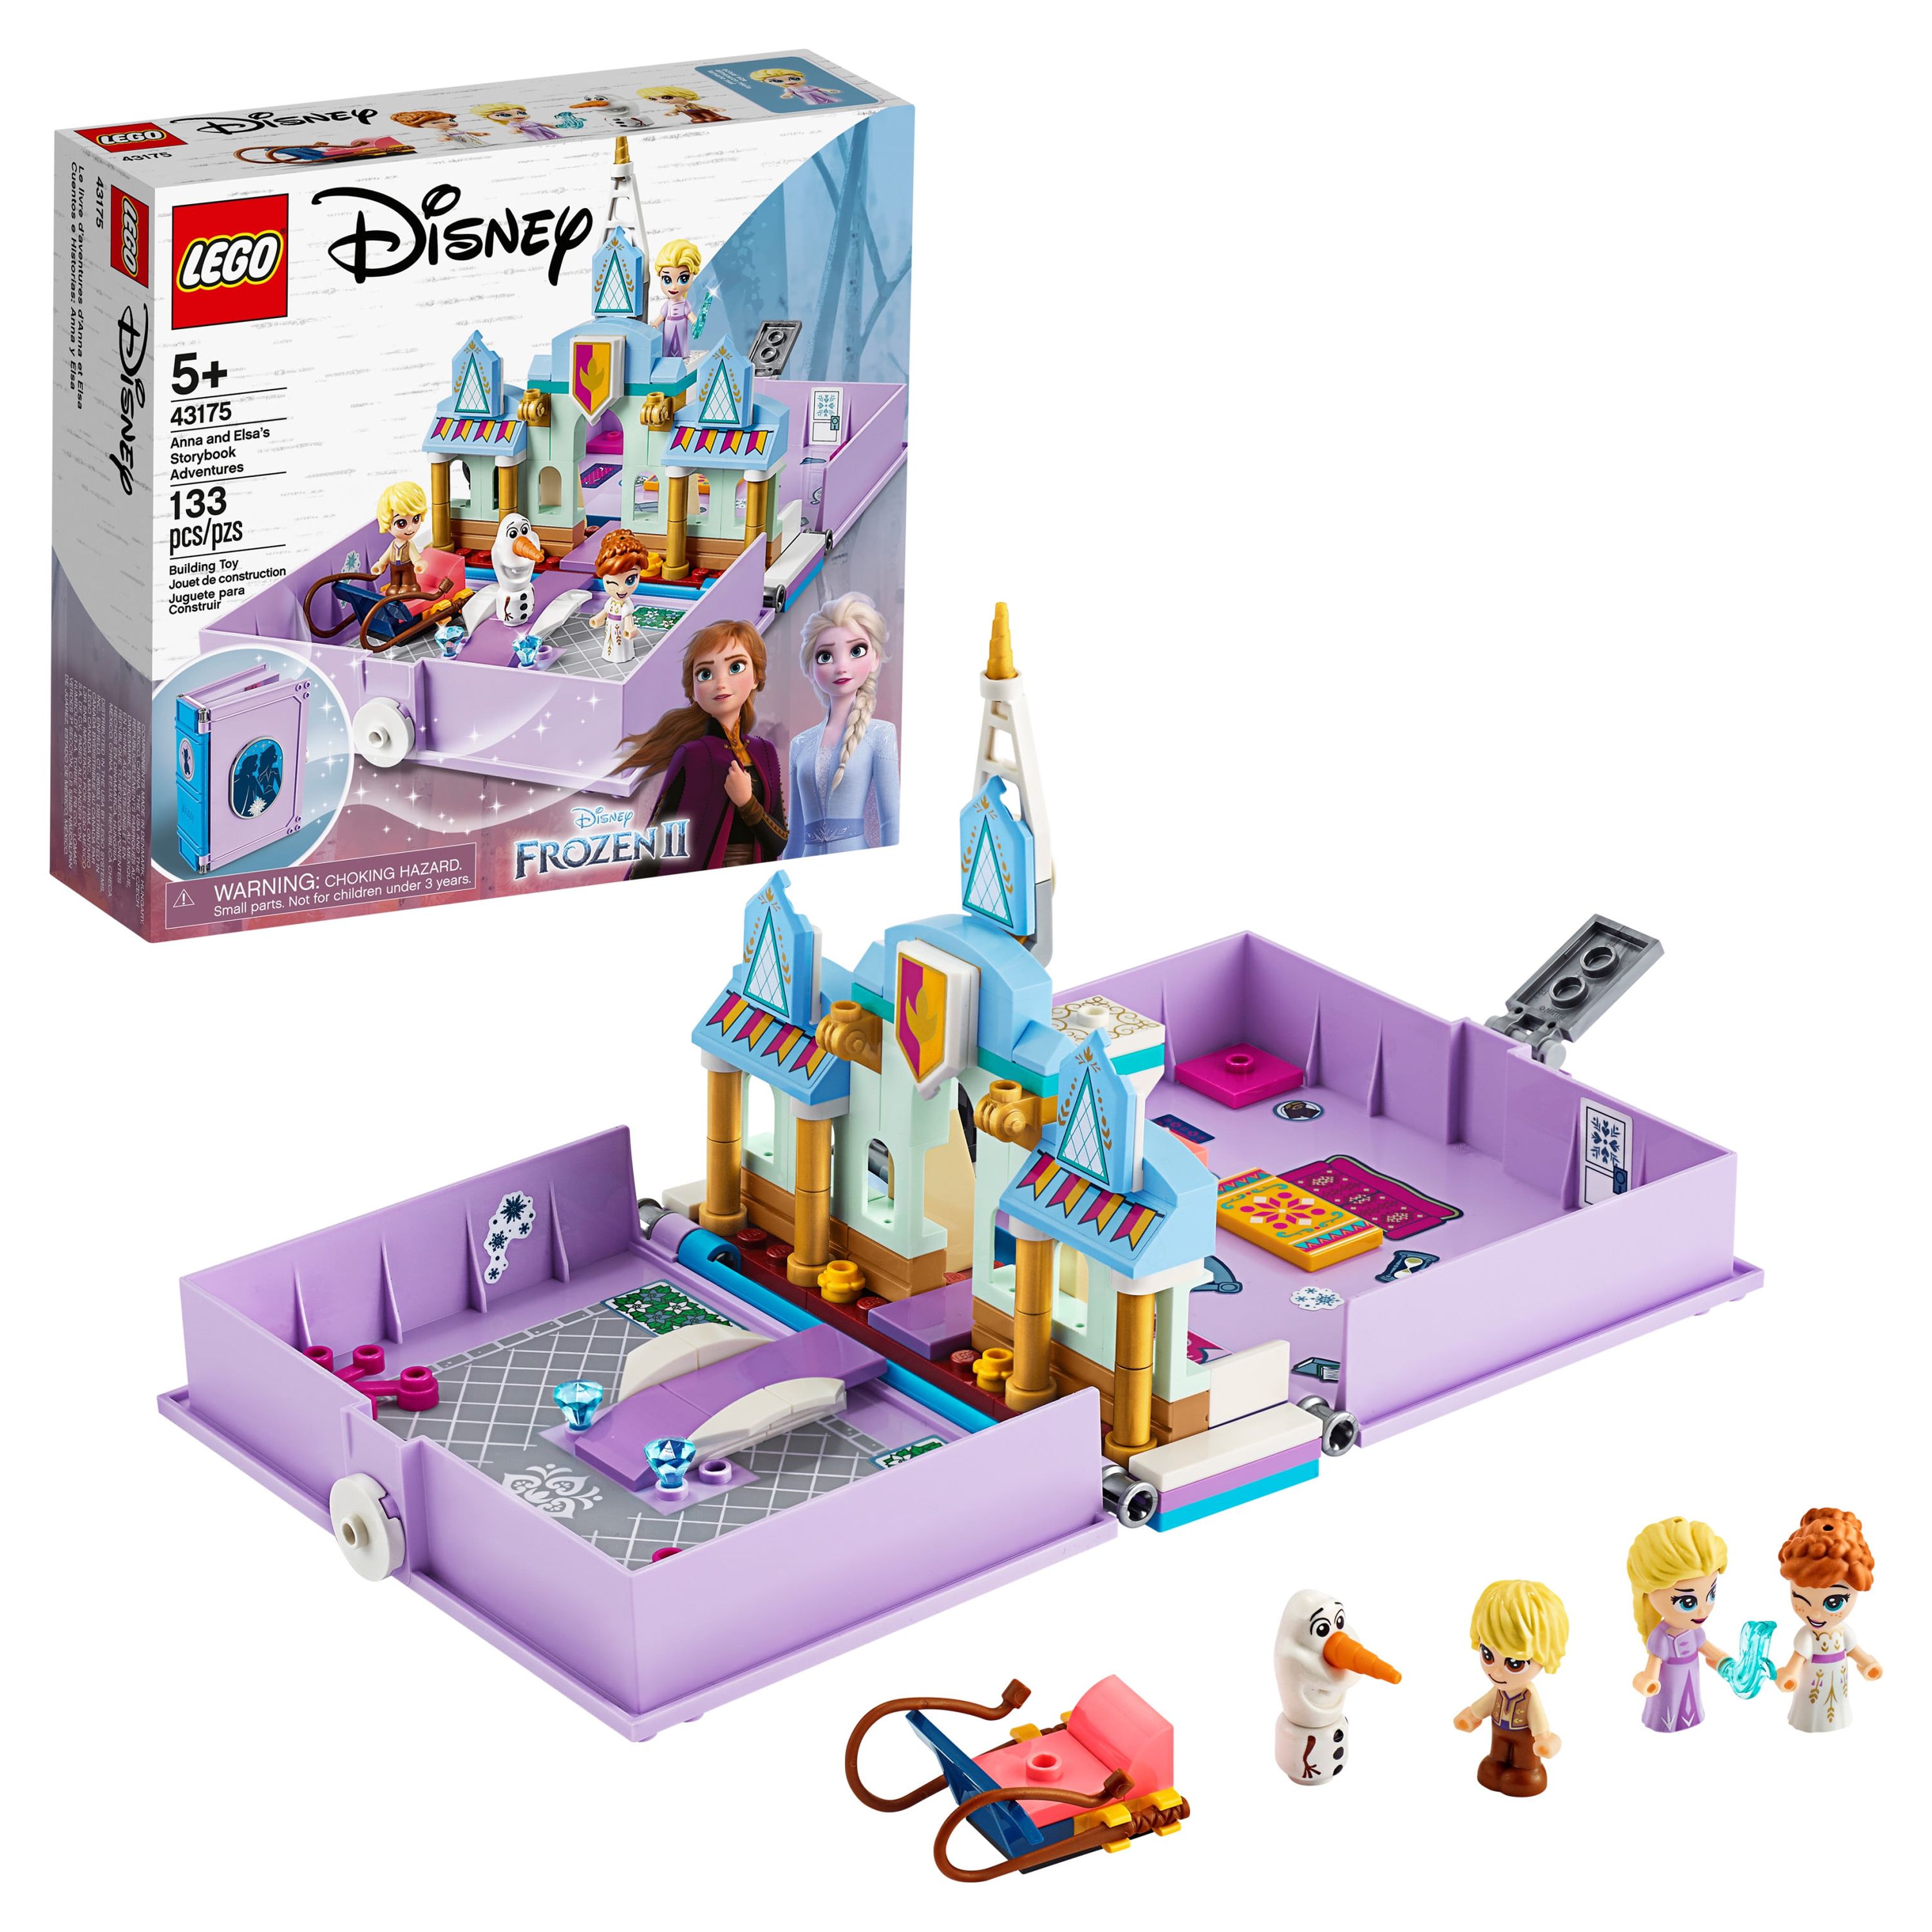 LEGO Disney Anna and Elsa’s Storybook Adventures 43175 Creative Building Kit (133 Pieces) - image 1 of 7